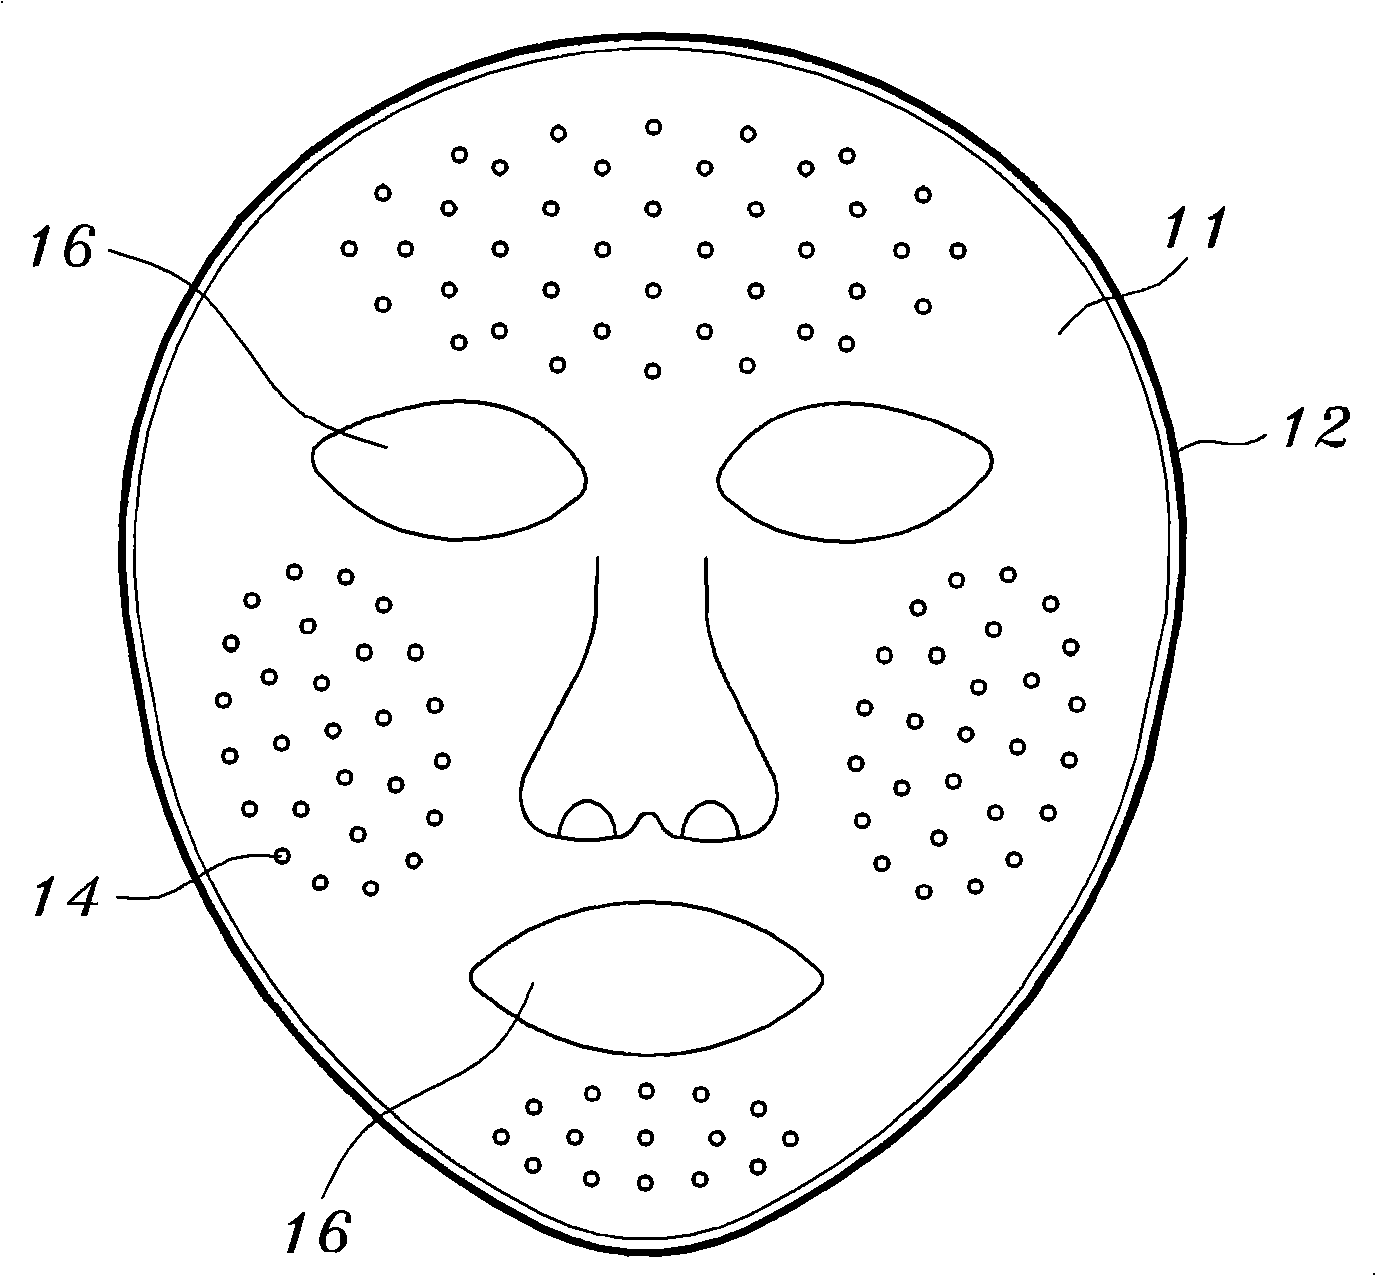 Mask for massaging the face